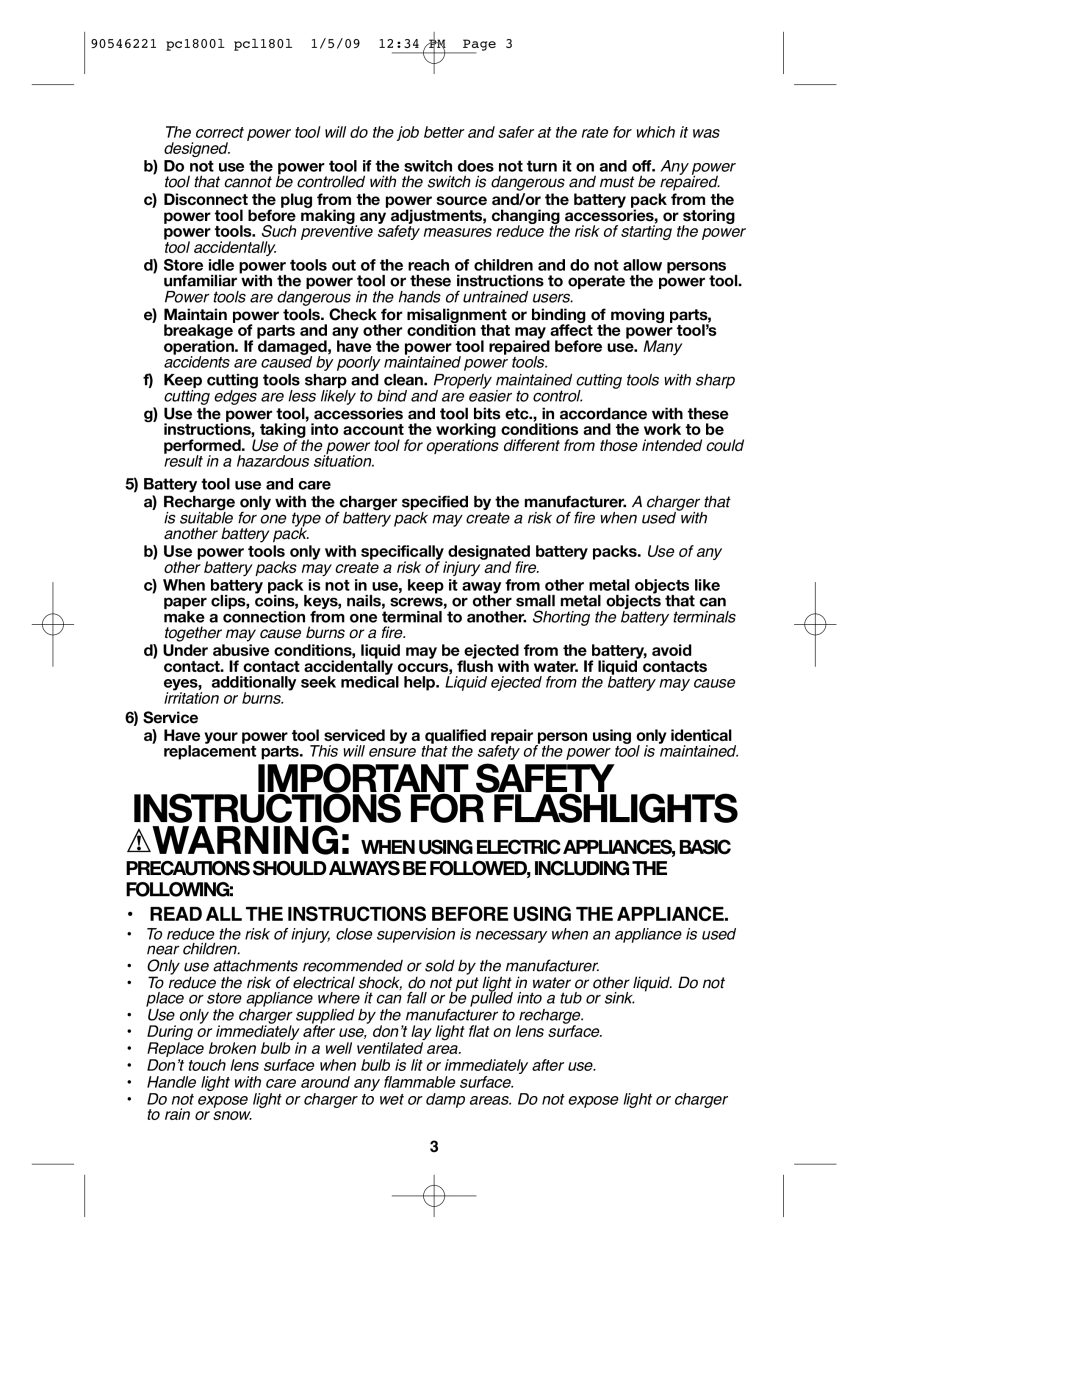 Porter-Cable PC1800L, PCL180L, 90546221 Important Safety Instructions For Flashlights, 5Battery tool use and care, 6Service 